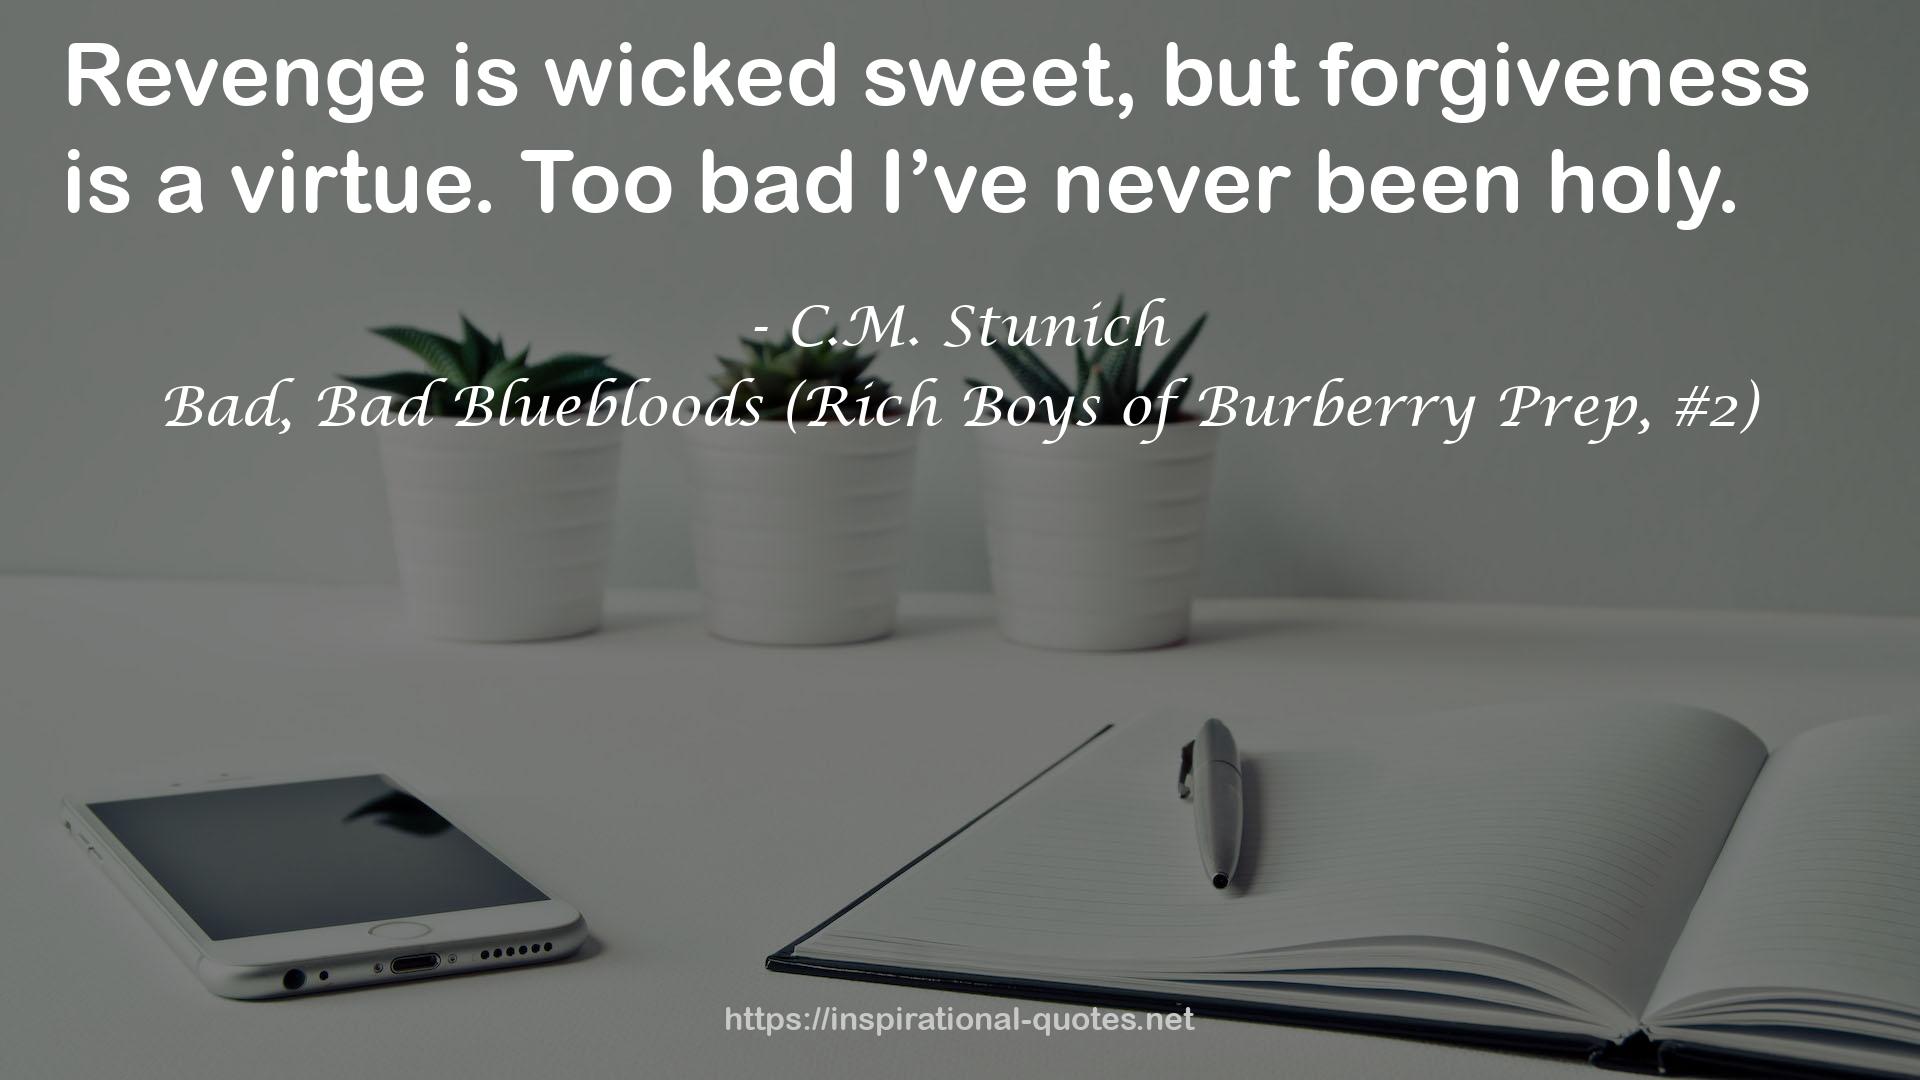 Bad, Bad Bluebloods (Rich Boys of Burberry Prep, #2) QUOTES